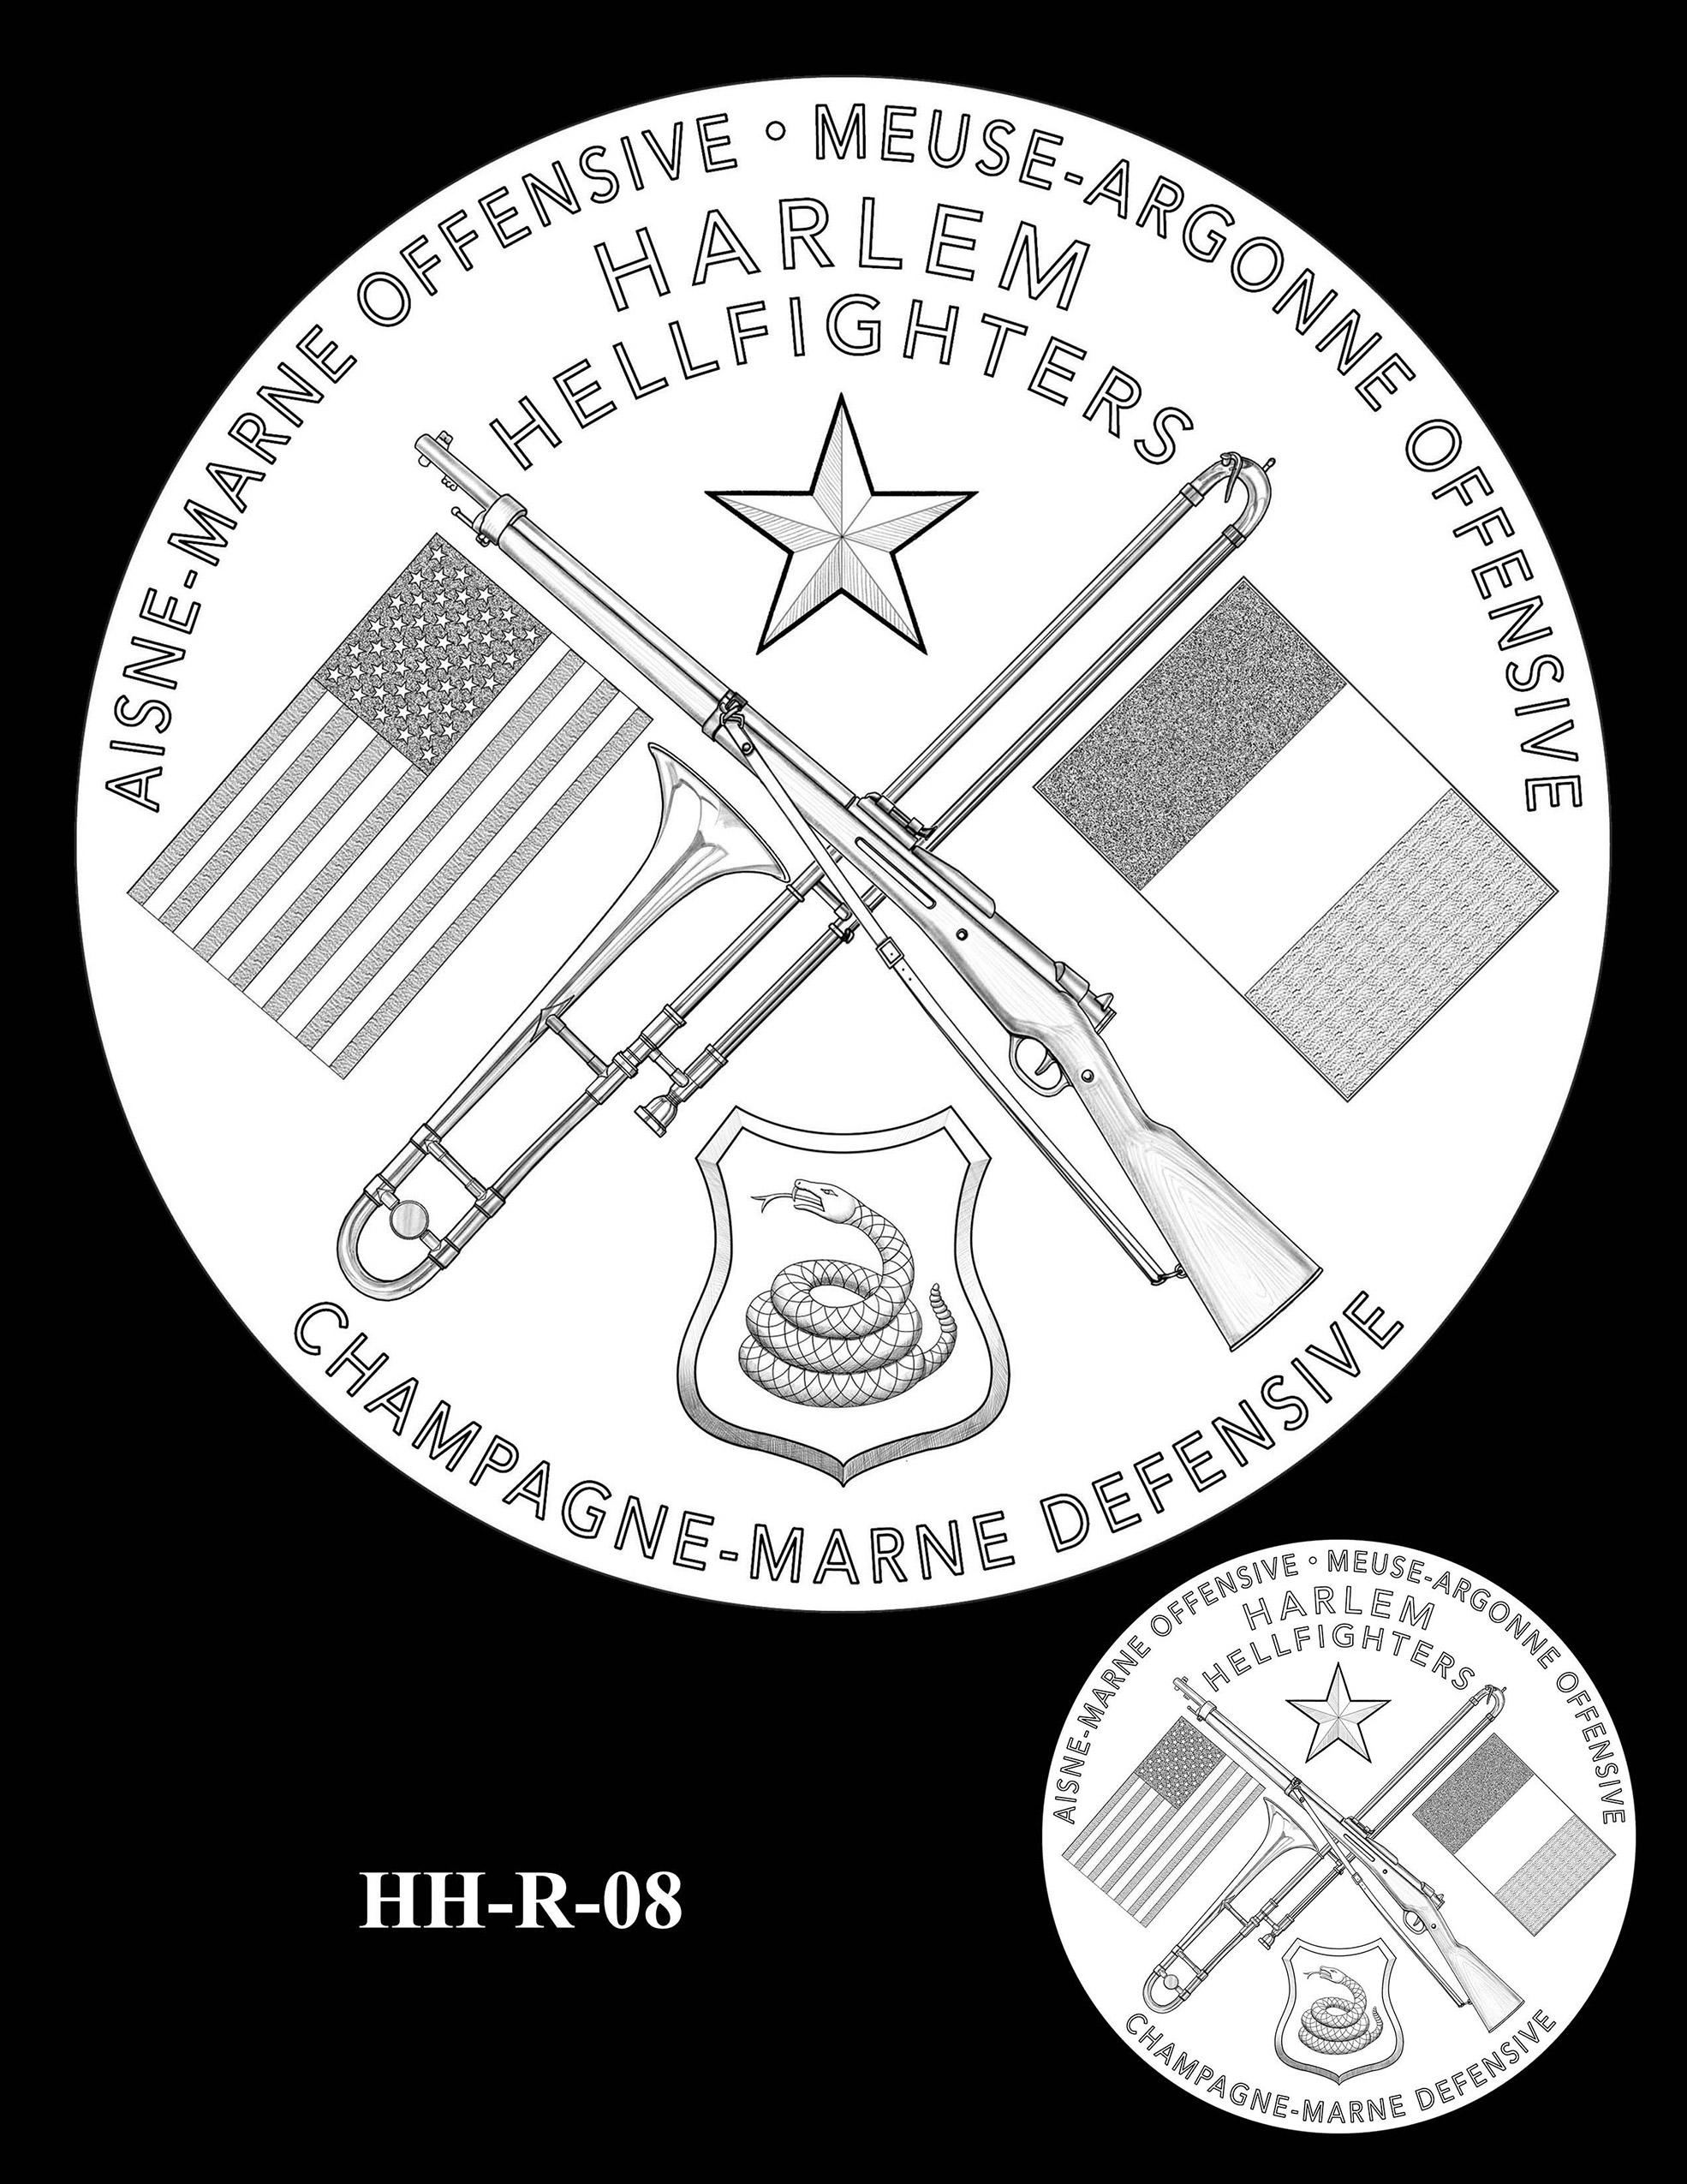 HH-R-08 -- Harlem Hellfighters Congressional Gold Medal